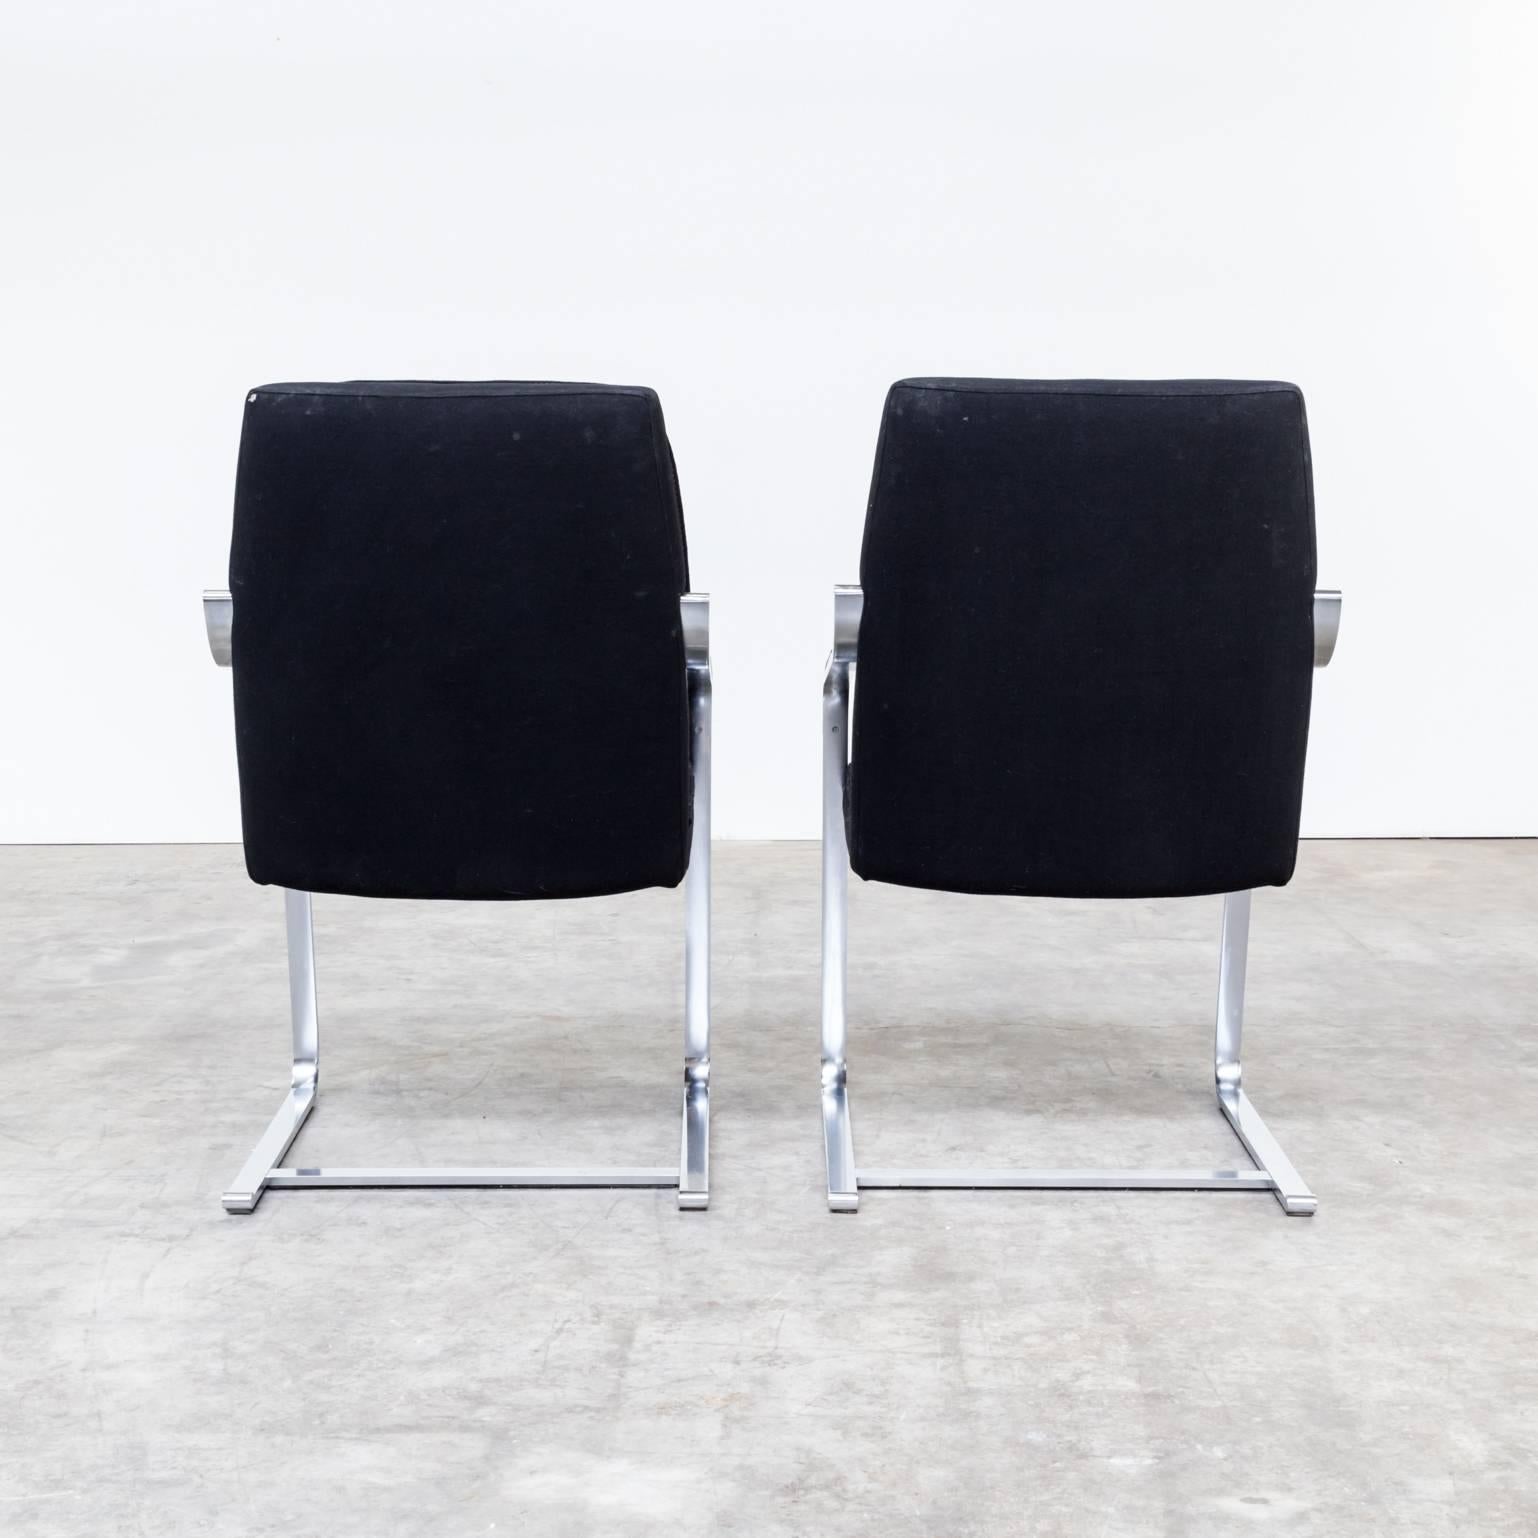 Polychromed Walter Knoll Chrome Framed Chairs, Set of Two For Sale